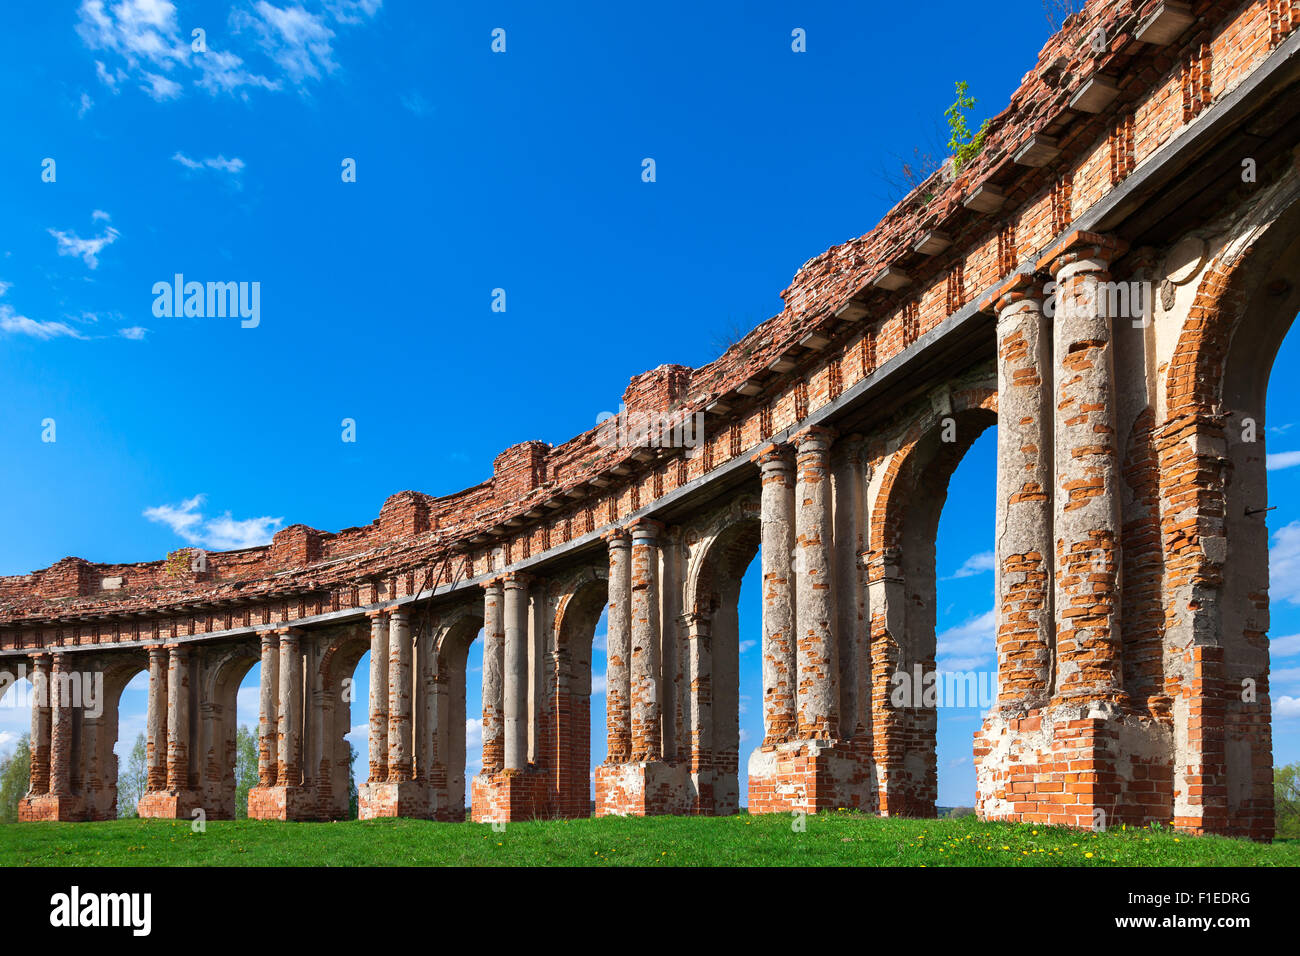 Columns of ruined castle Stock Photo